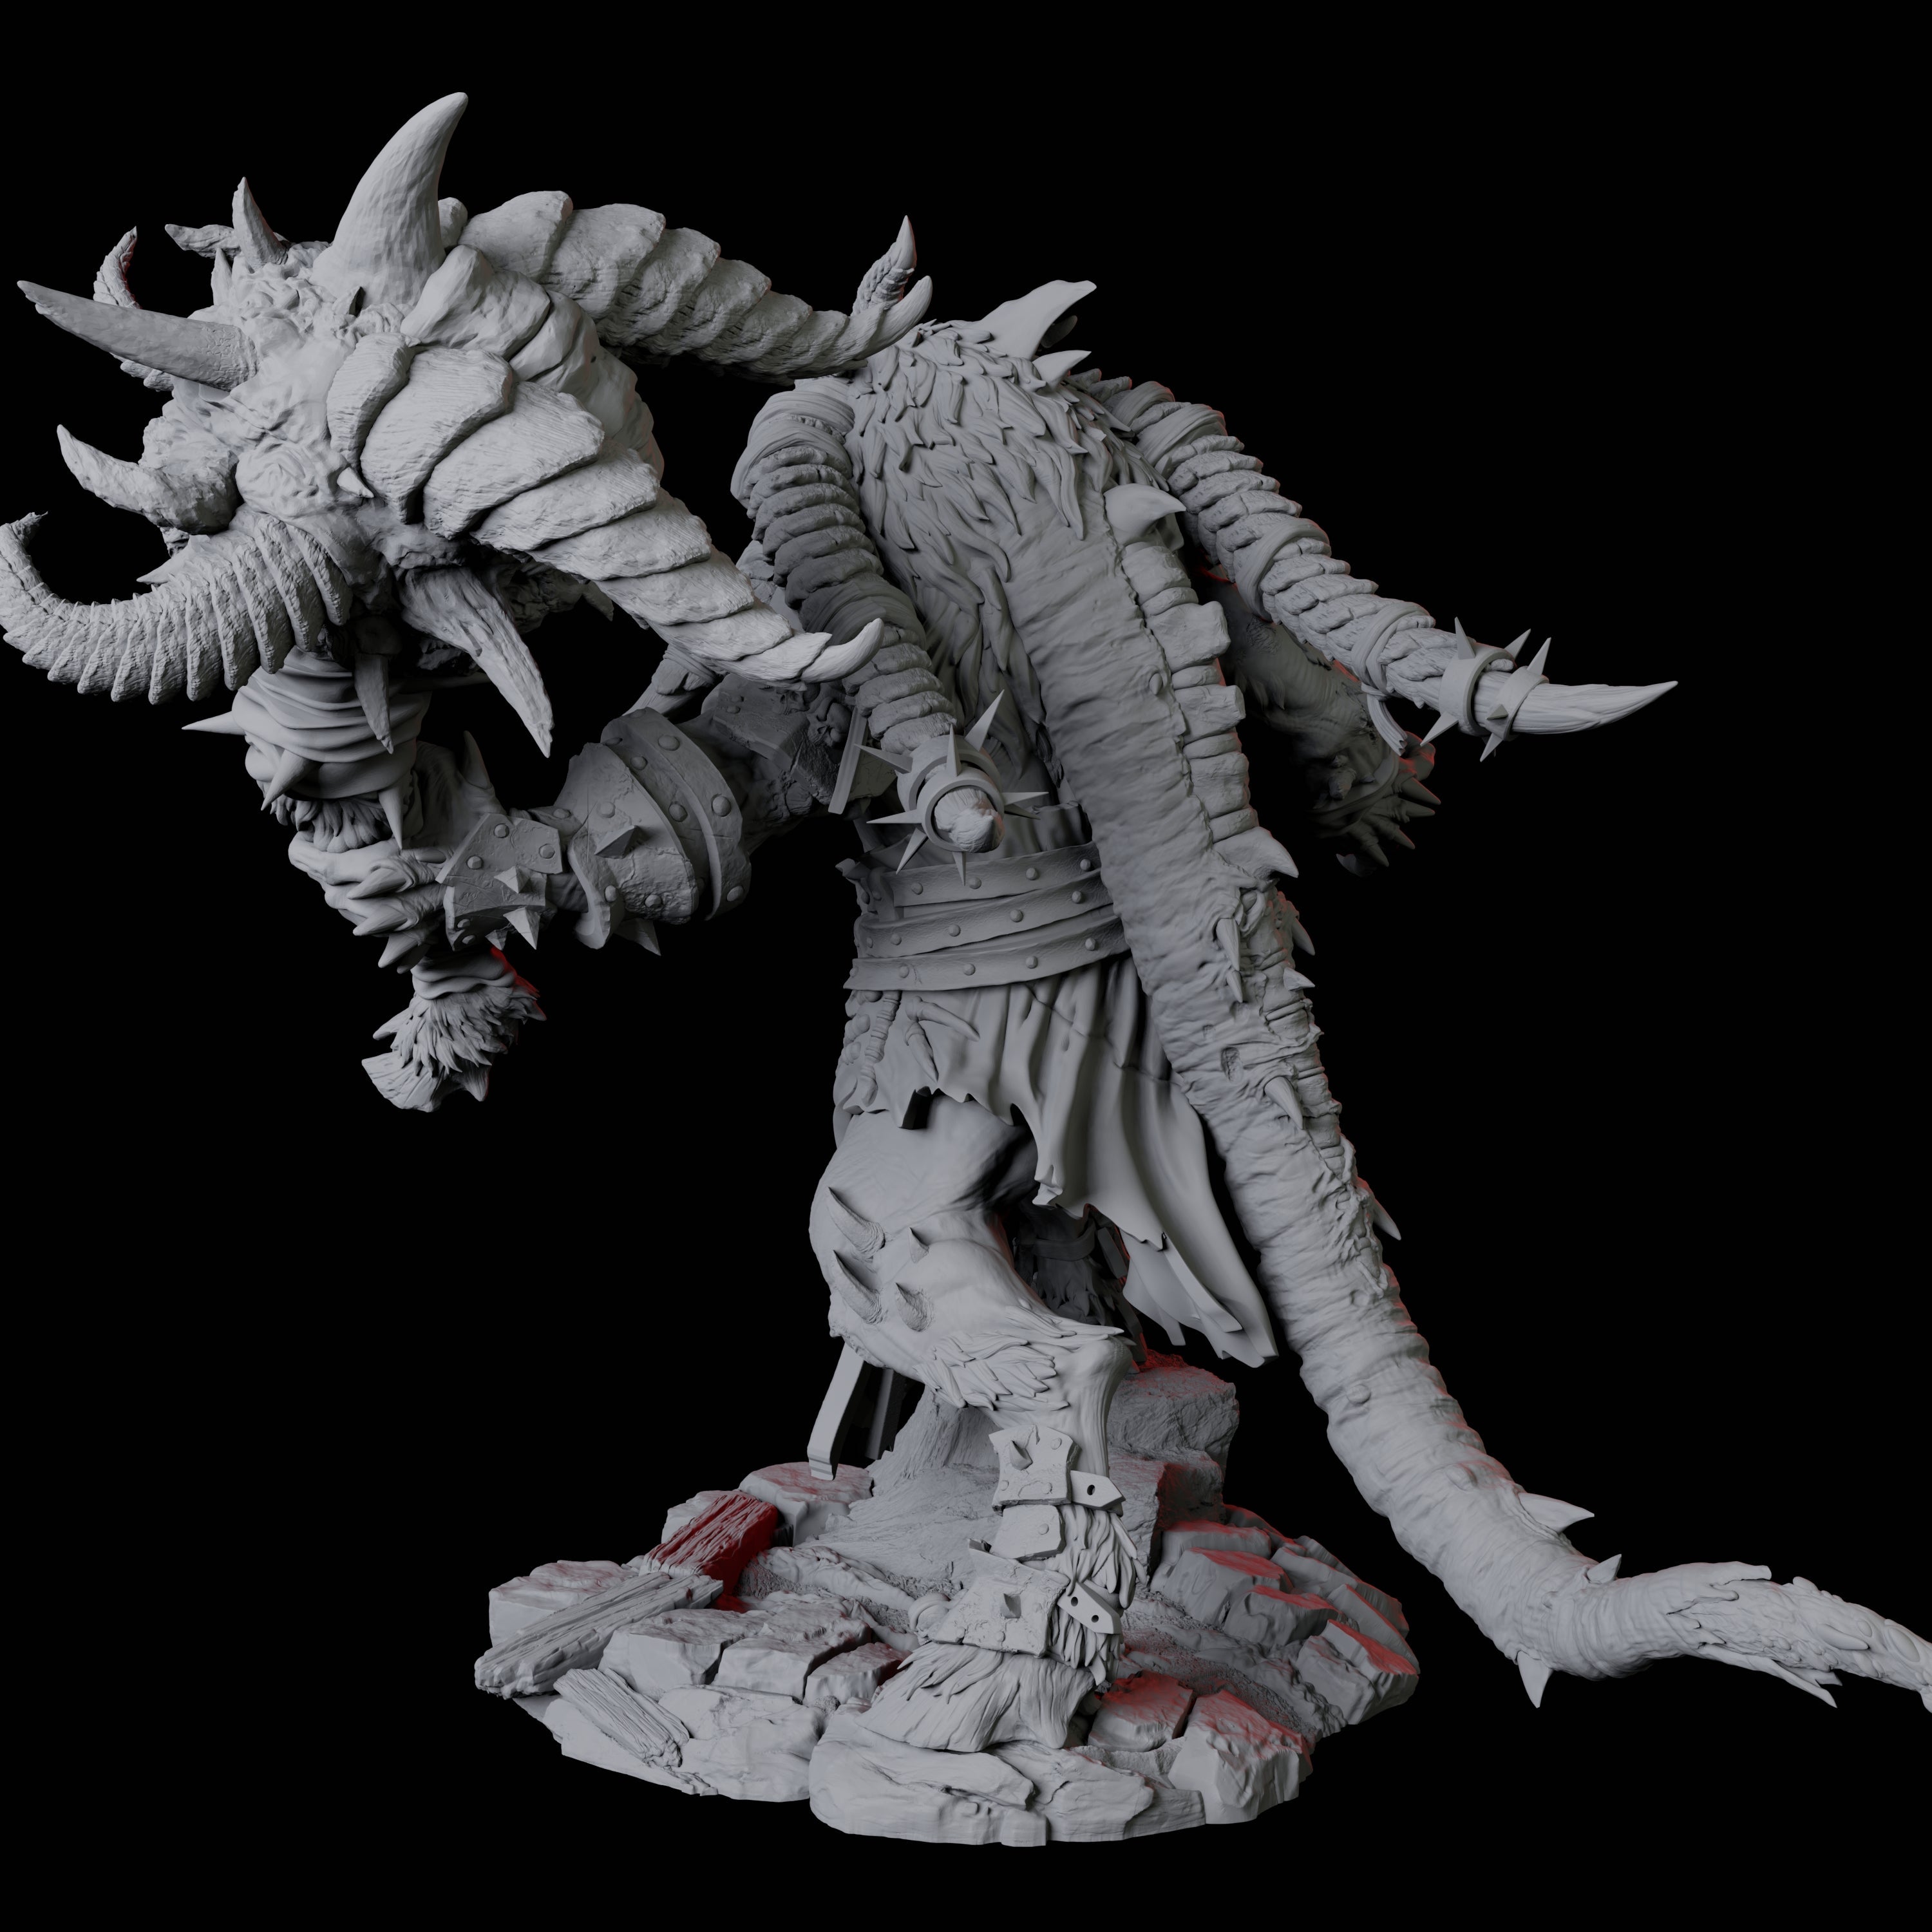 Giant Ratfolk Barbarian B Miniature for Dungeons and Dragons, Pathfinder or other TTRPGs